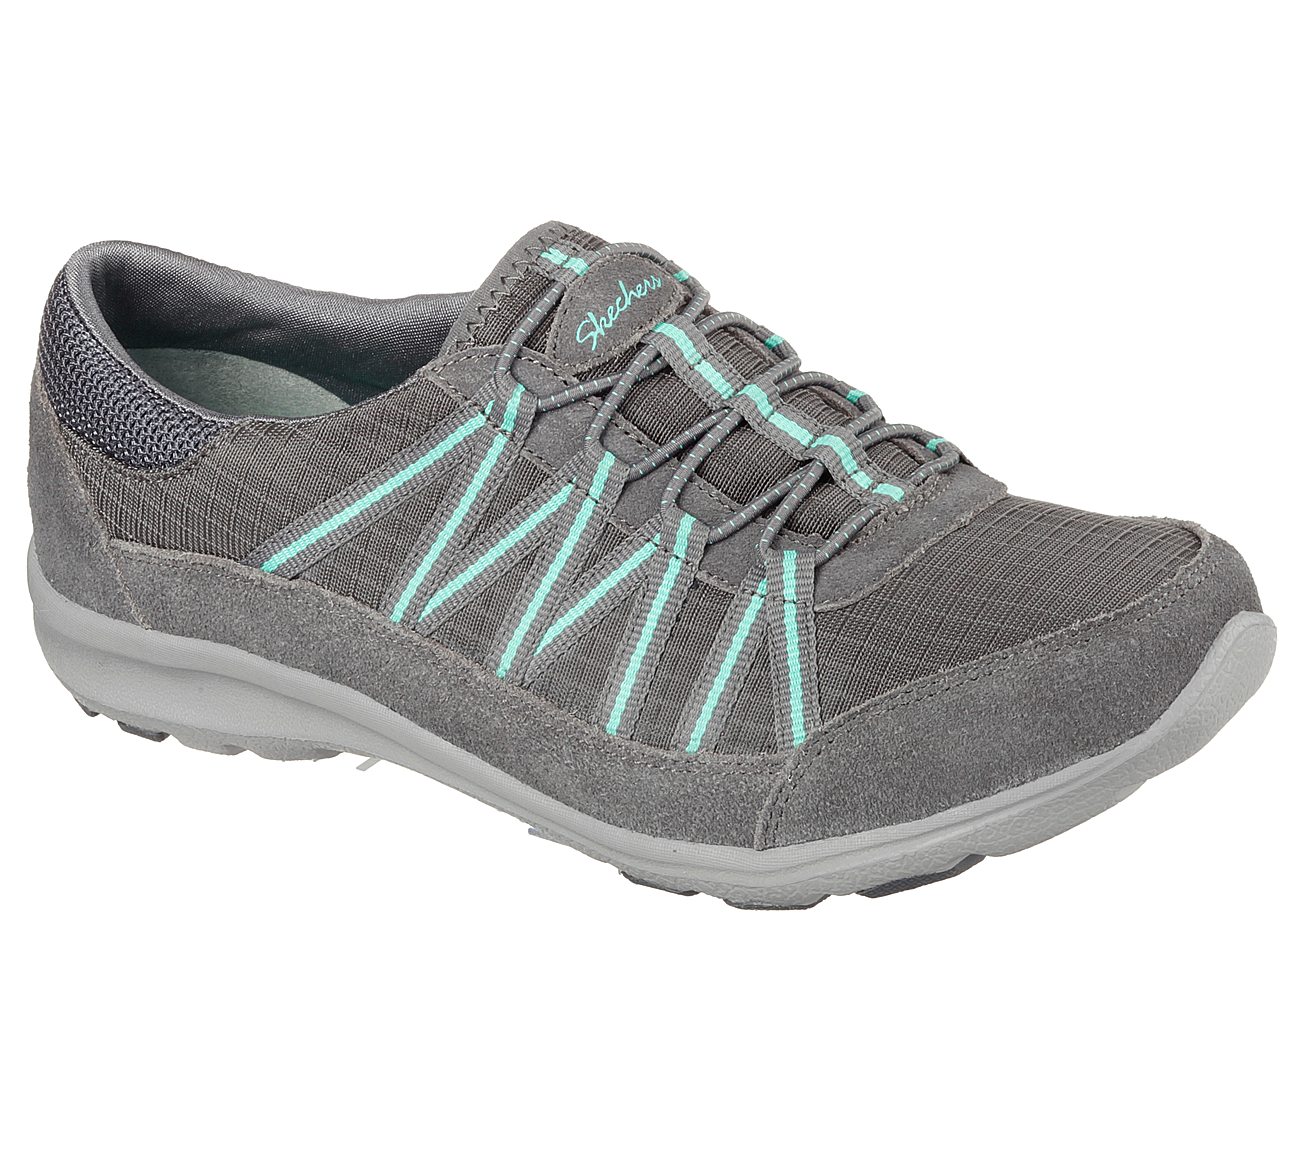 Buy SKECHERS Dreamchaser - Romantic Trail Active Shoes